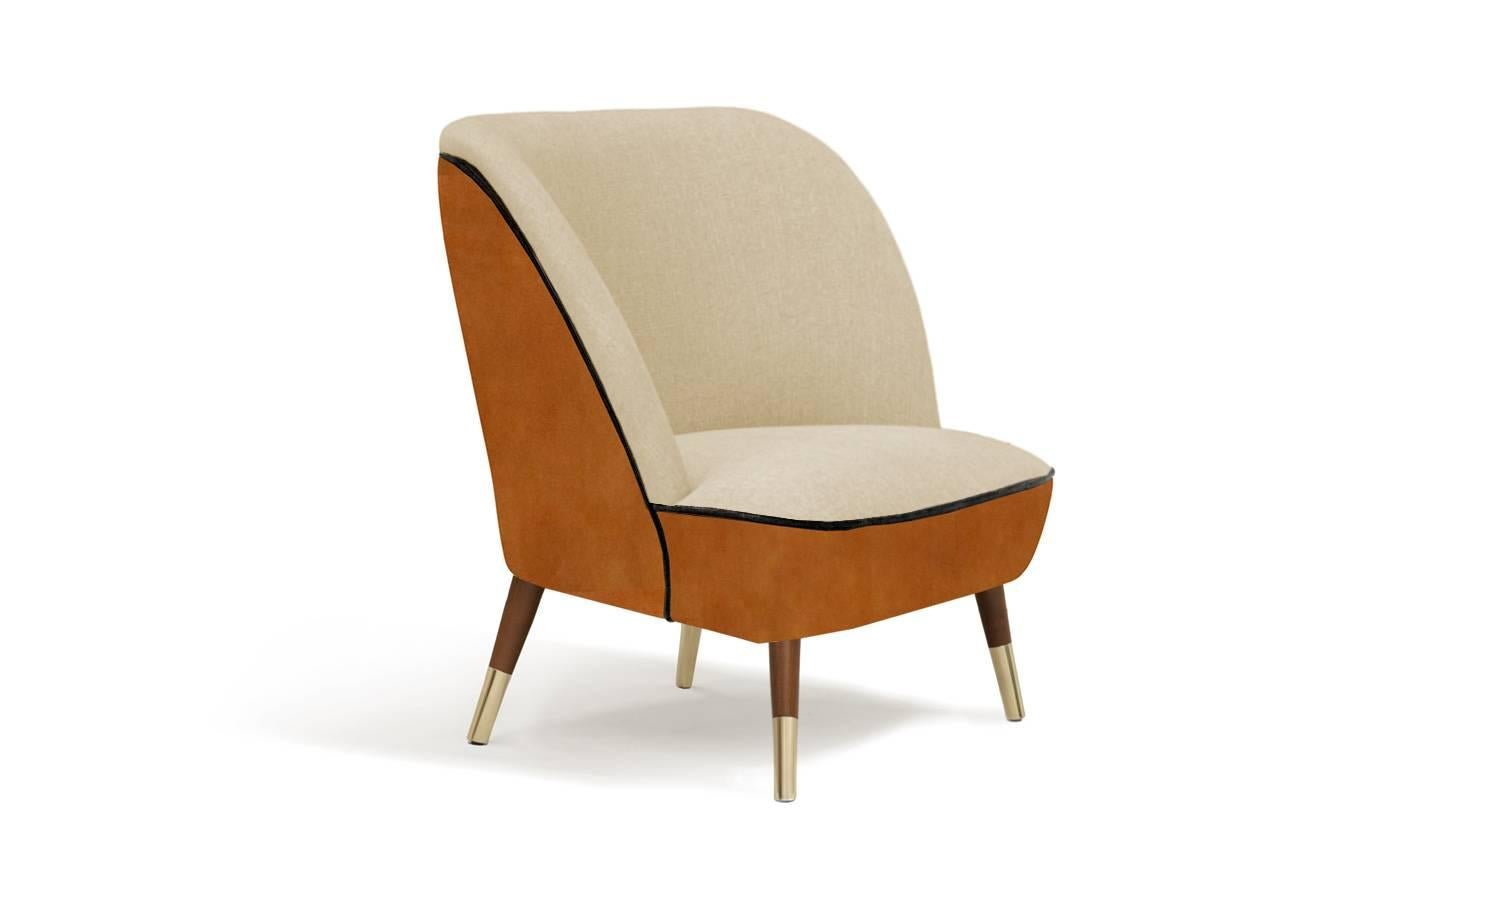 As you approach the Oslo accent chair, you can't help but be struck by its clean, mid-century modern Danish design. The chair's simple lines and neutral colors are both elegant and understated, making it the perfect addition to any room. The leather